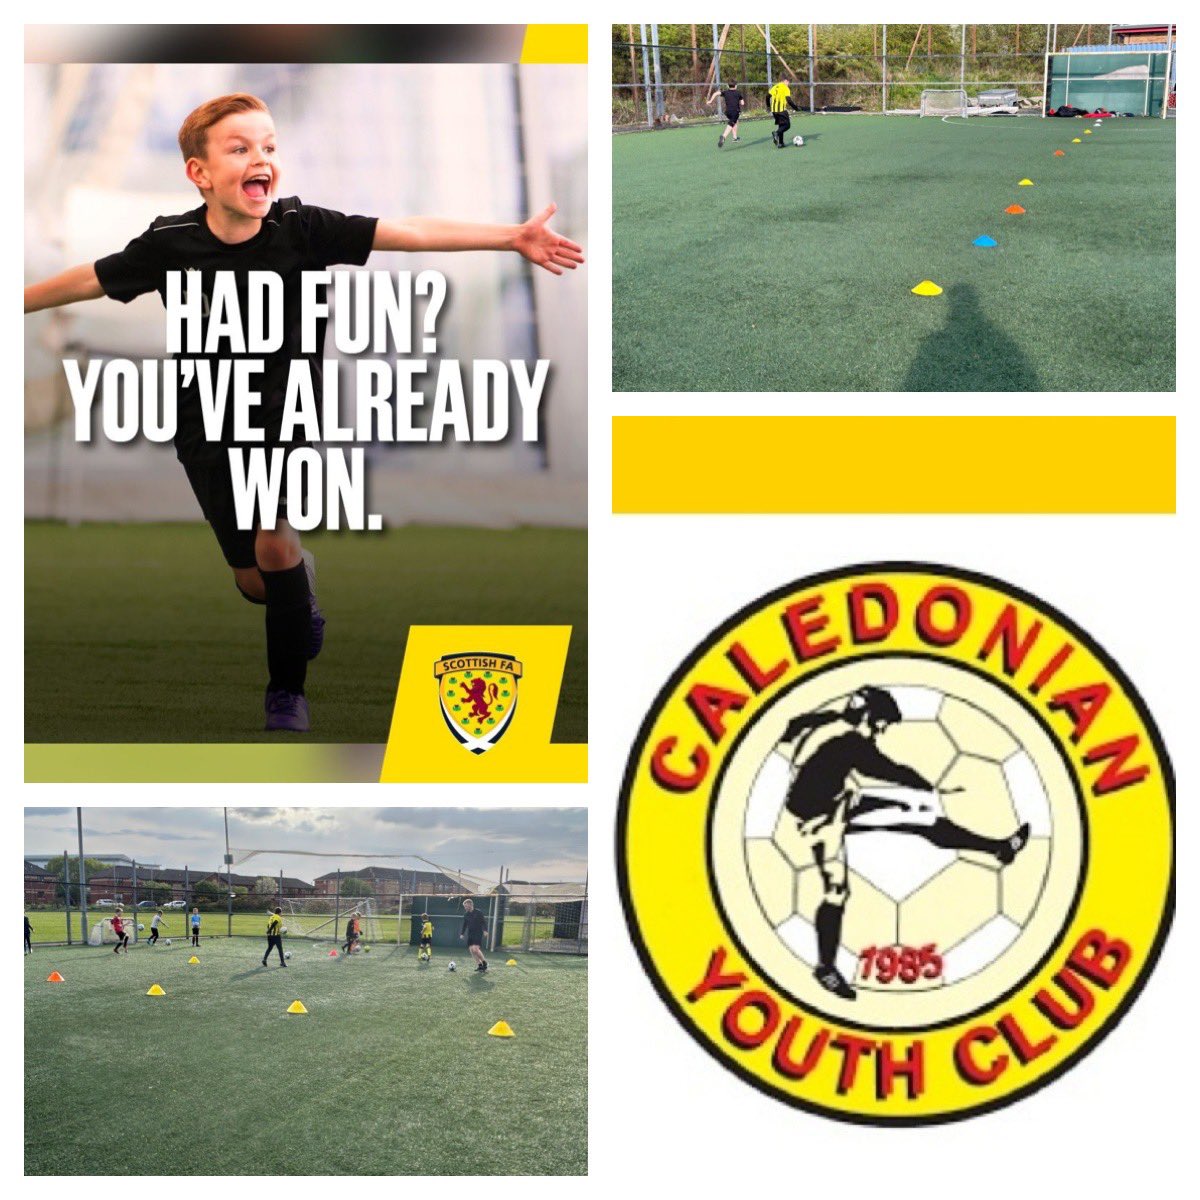 Fun filled session for the 2016s tonight @ Caley 🤩 

Lots of touches of the ⚽️ with the intro activity➡️ 1v1’s ➡️ SSG’s 🥅 

Great session by the coaches 👏🏼 

 2014s & 2015s enjoying their Thursday night training game against each other 🤝🏻😃

#PowerOfFootball 
#LetThemPlay